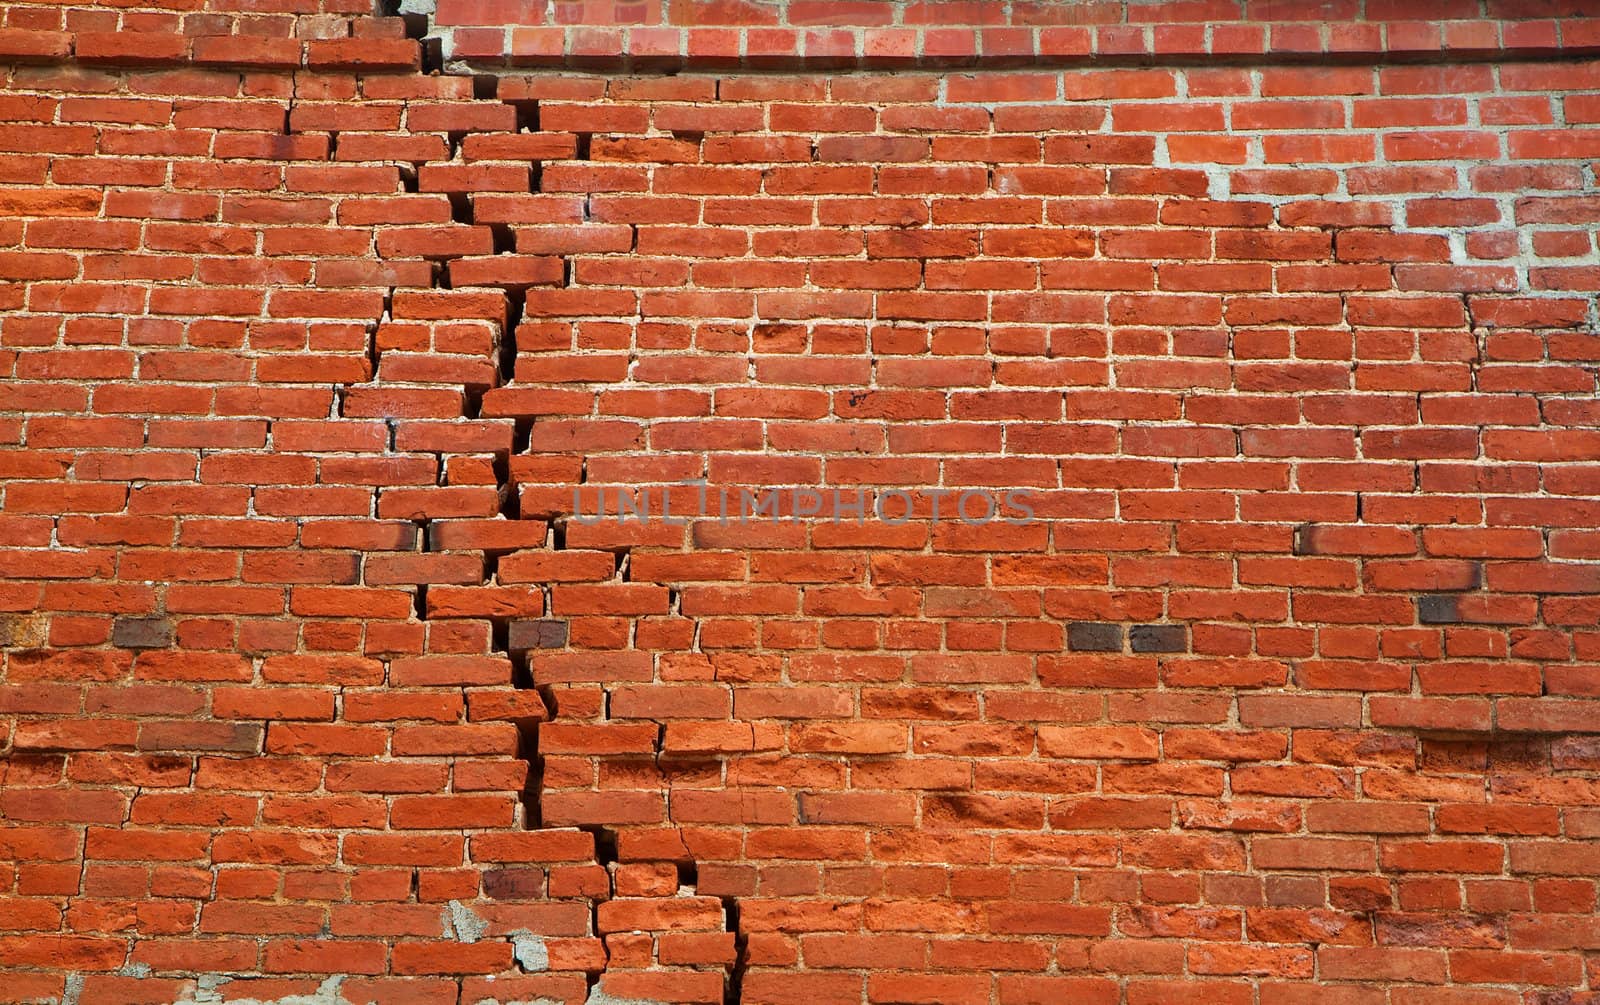 Large crack of separating bricks in a red wall